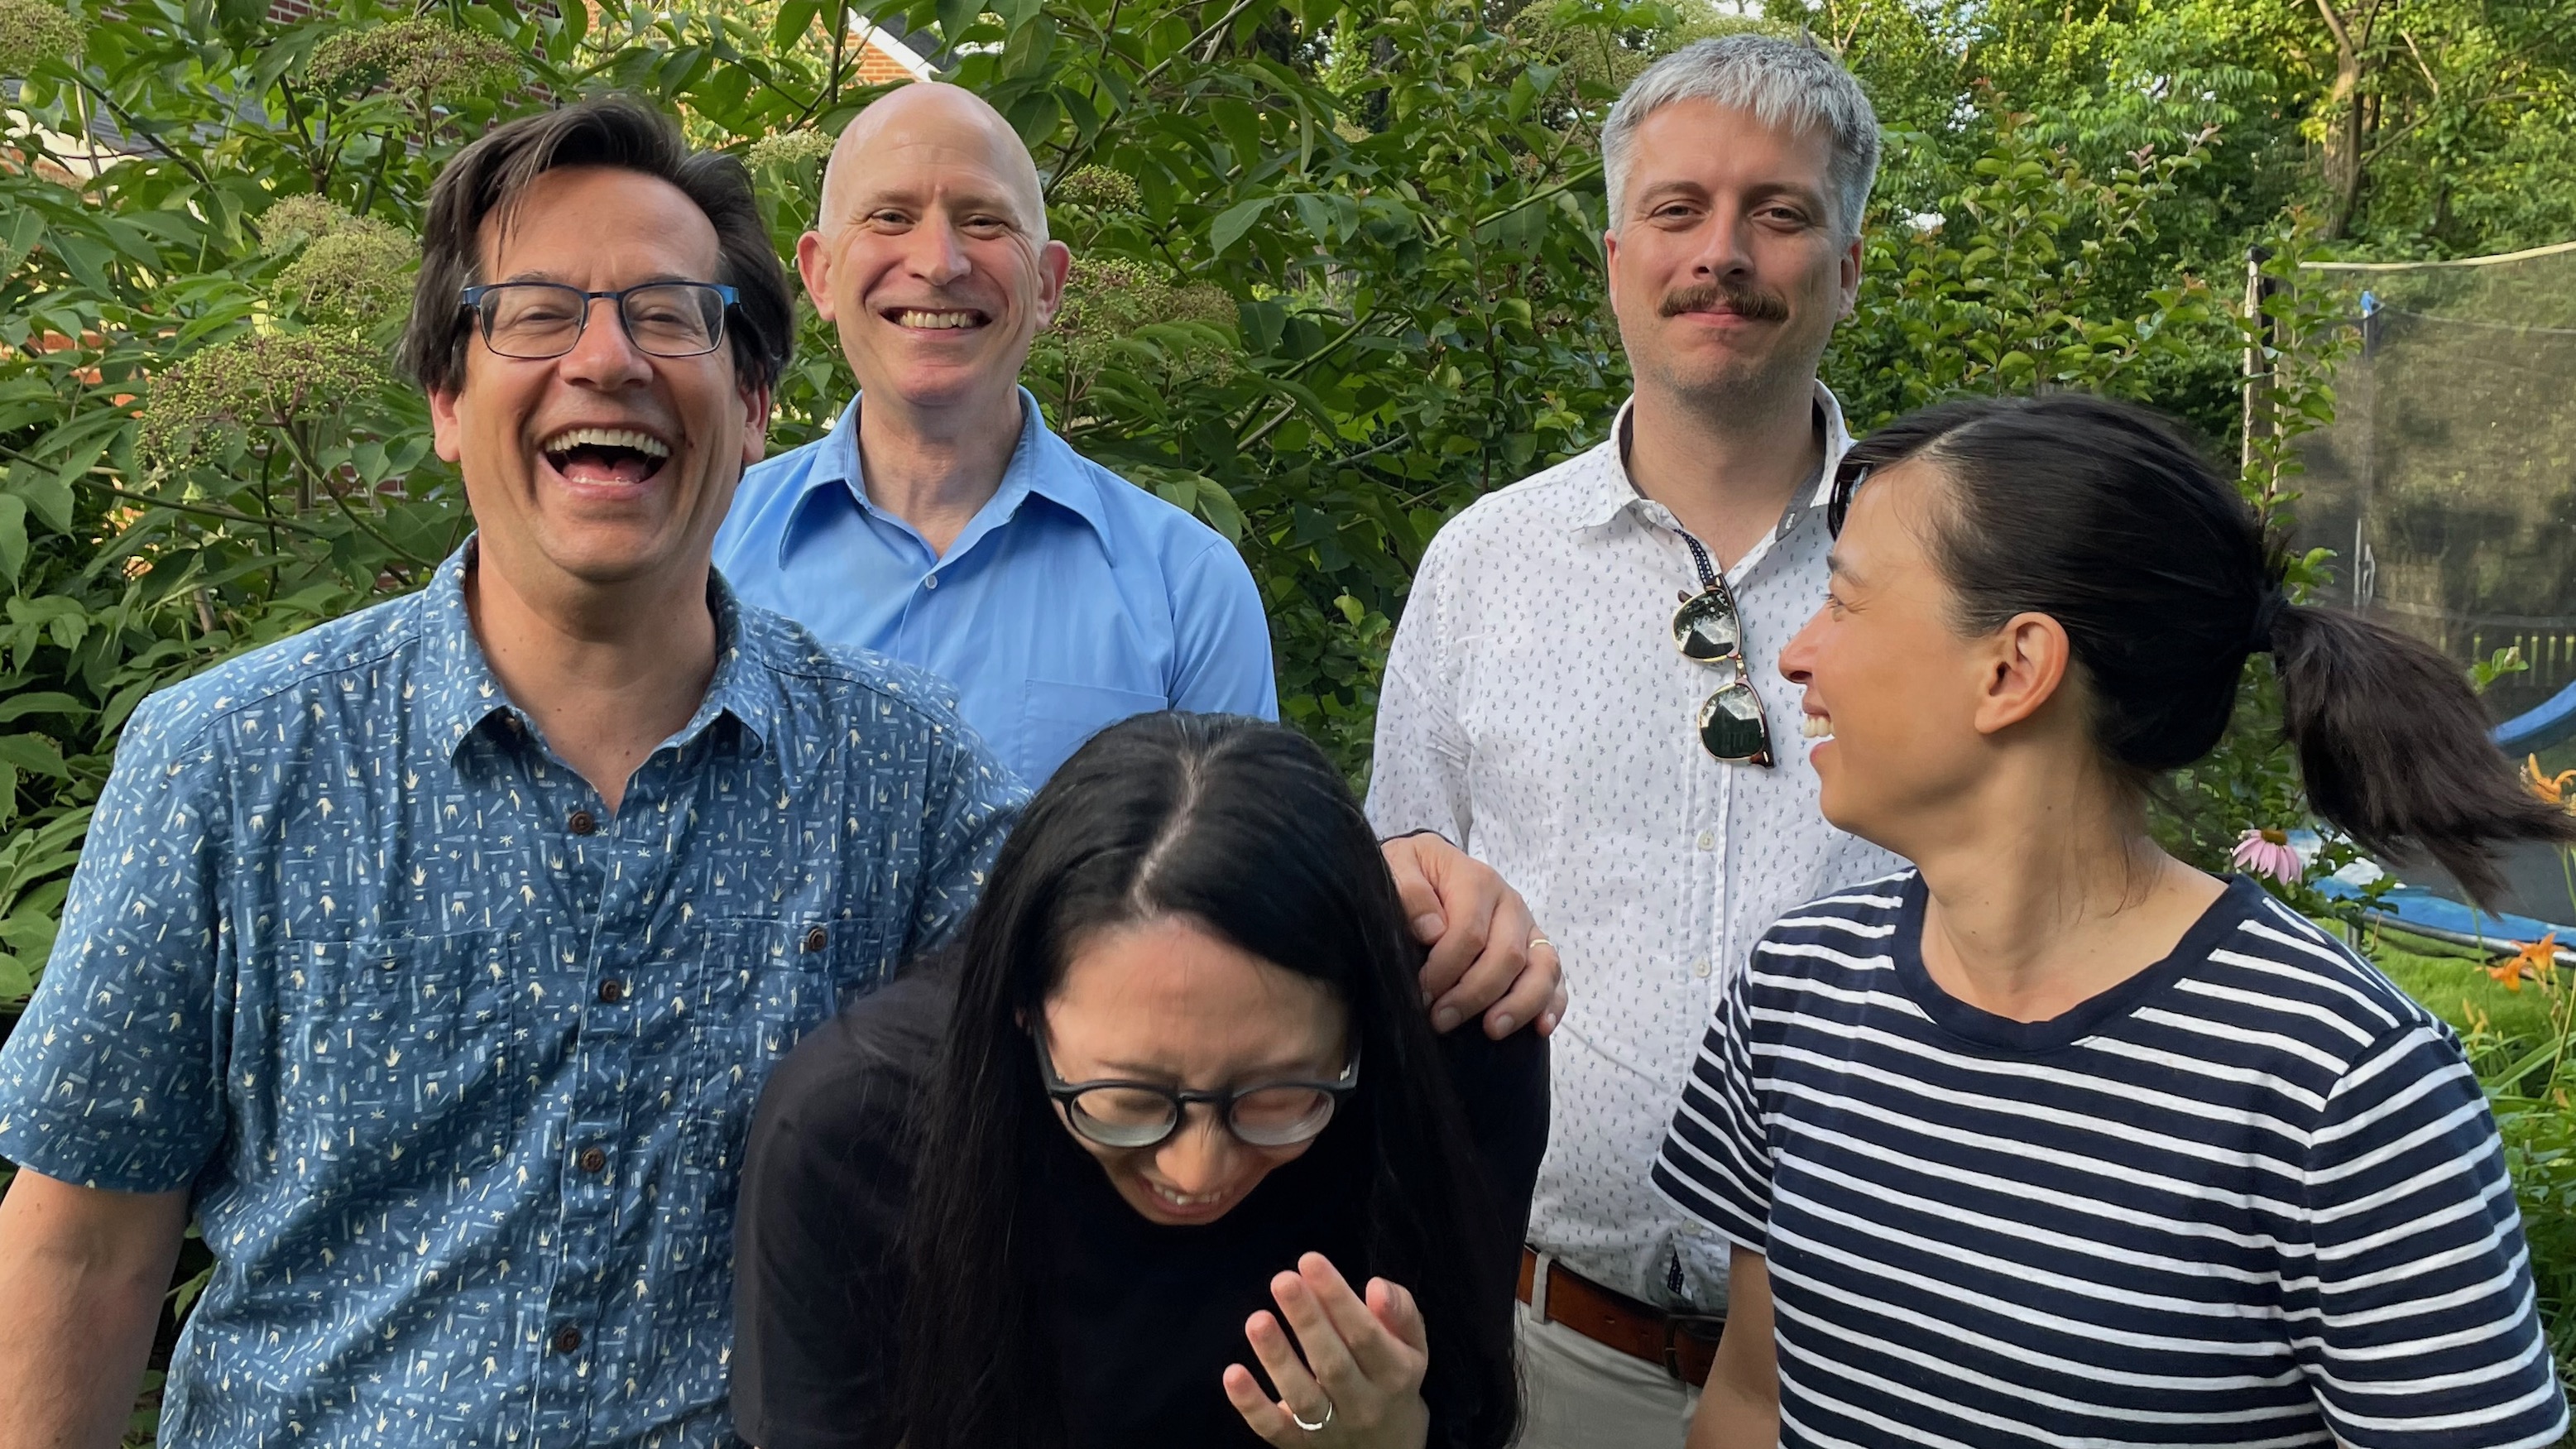 A group of five people in a garden, grouped for a photo, bursting into laughter.